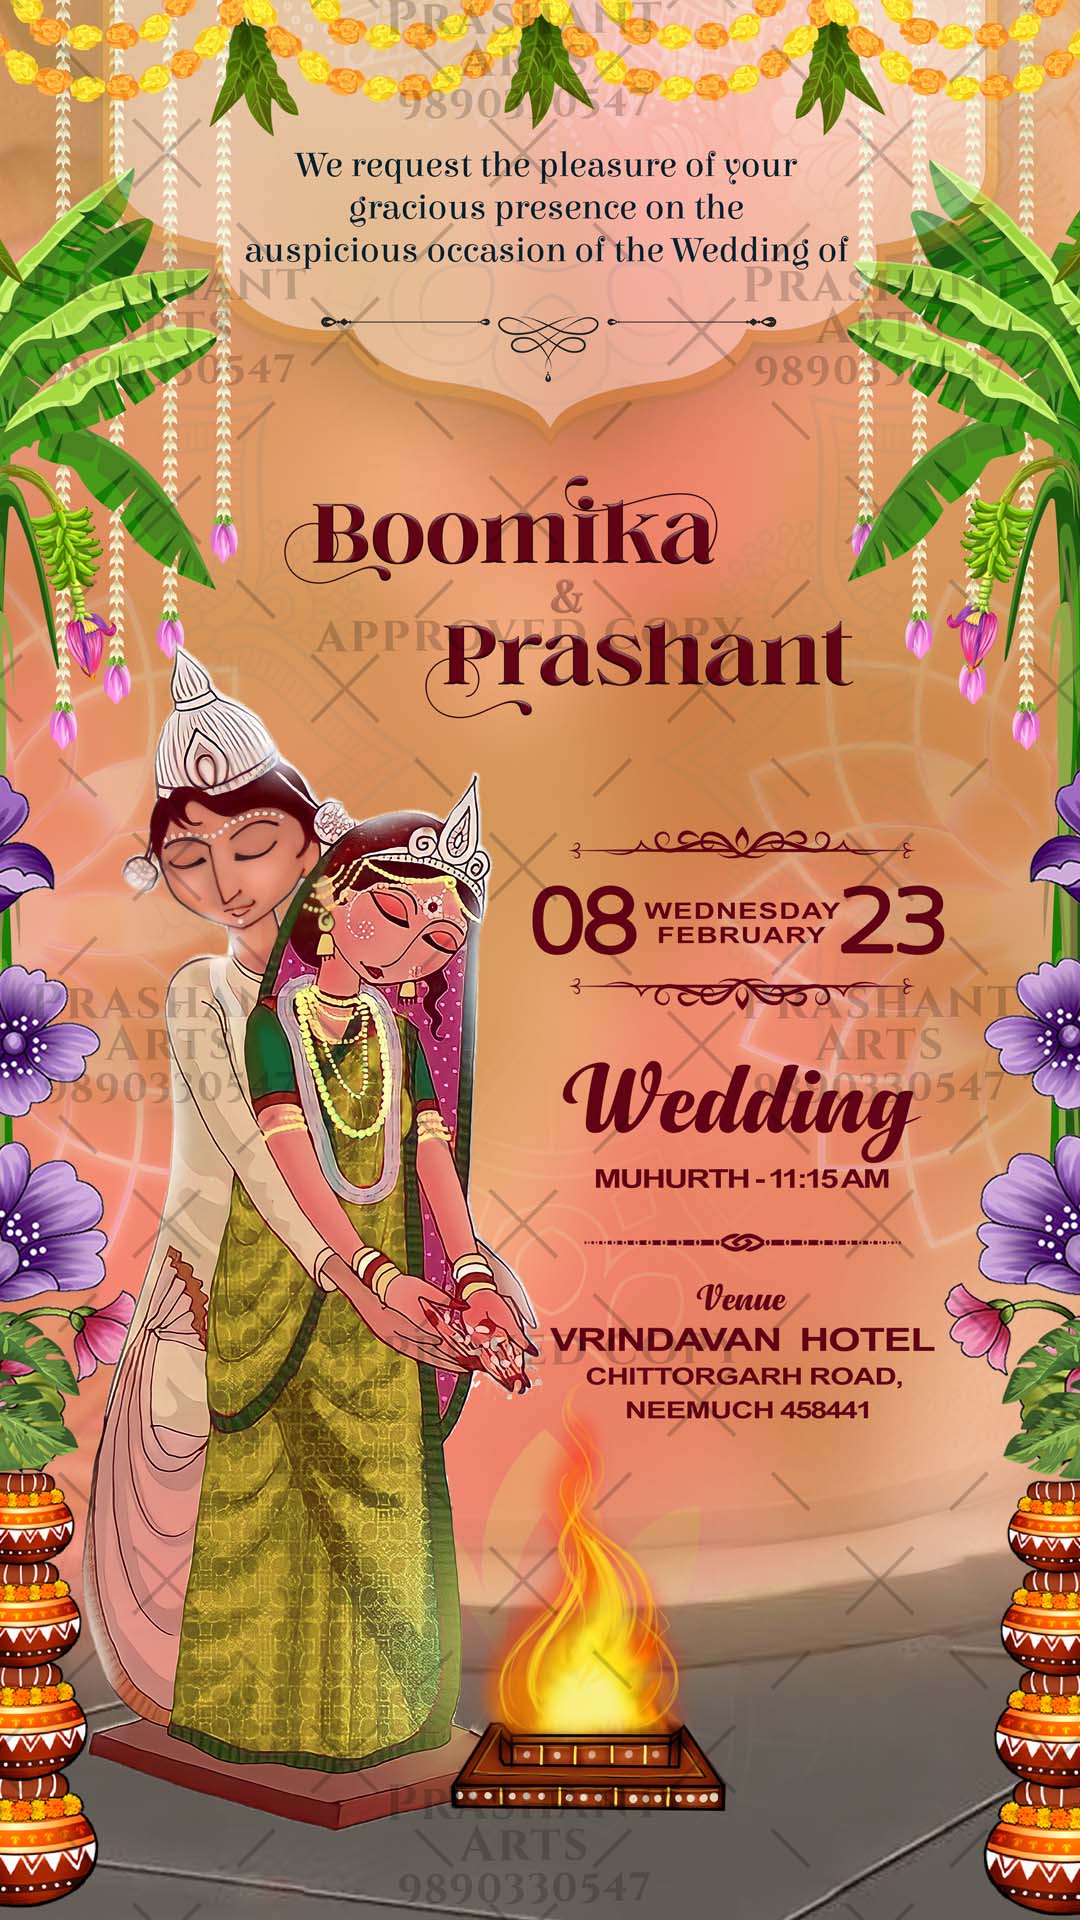 Impress Your Guests with Unique Bengali Wedding Invitation Designs | BE-005